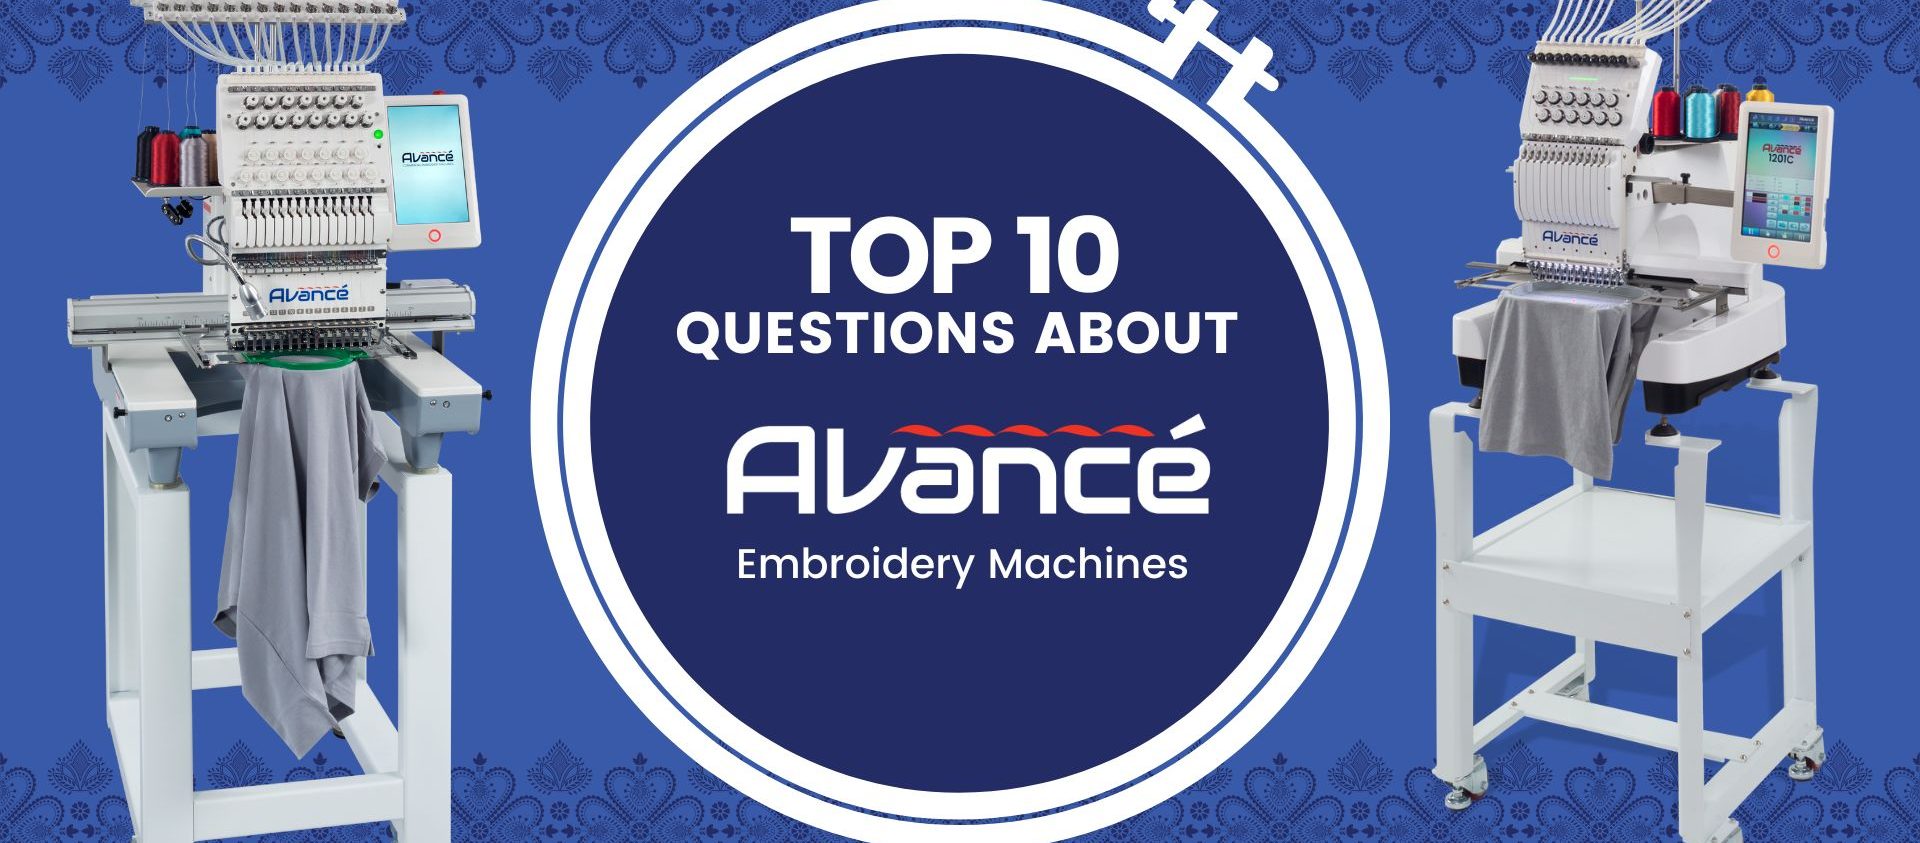 Top 10 Questions About Avancé Embroidery Machines